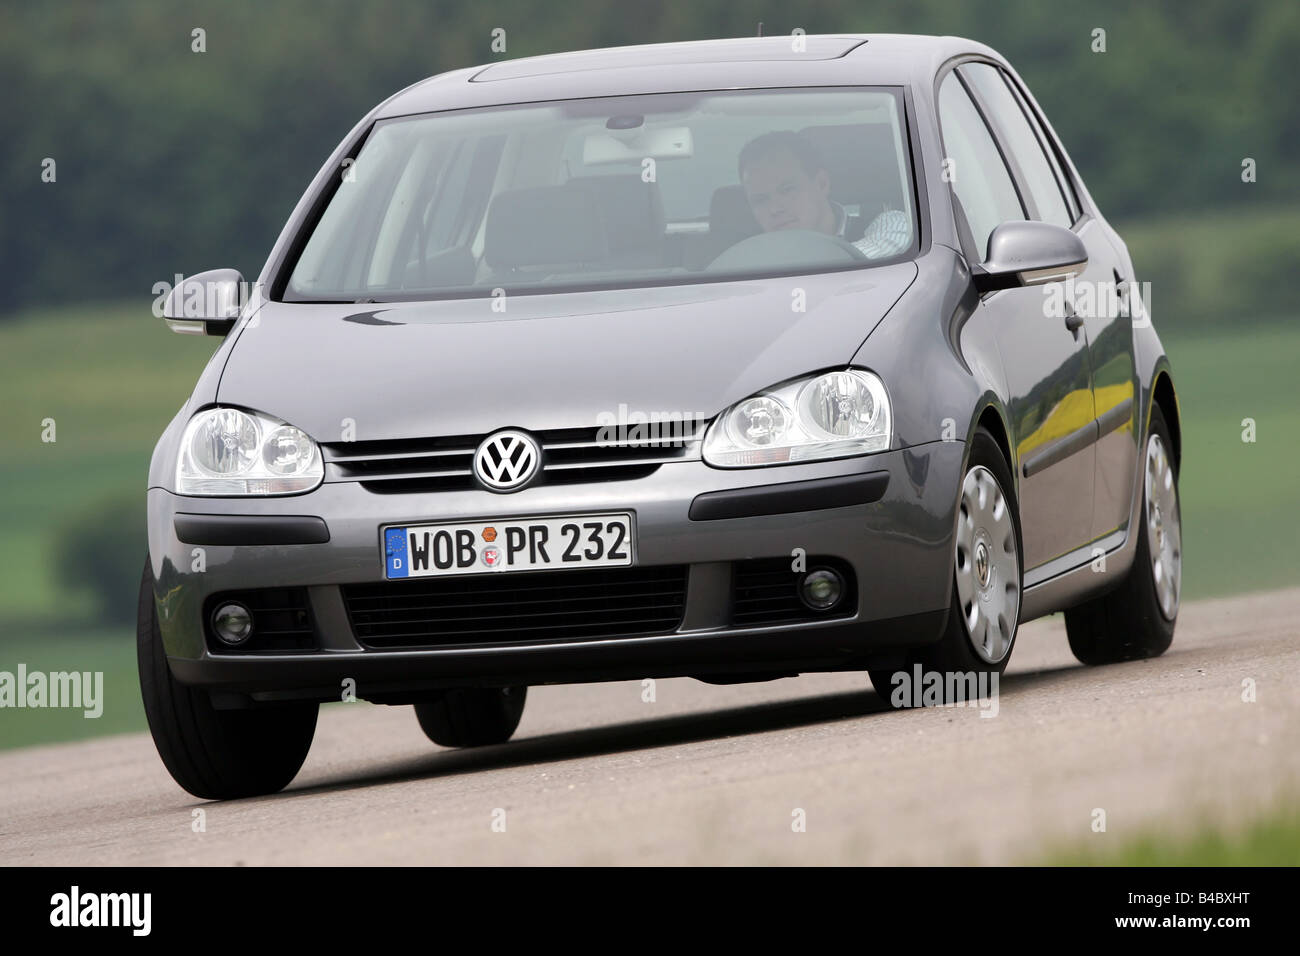 Vw Golf 1 High Resolution Stock Photography and Images - Alamy